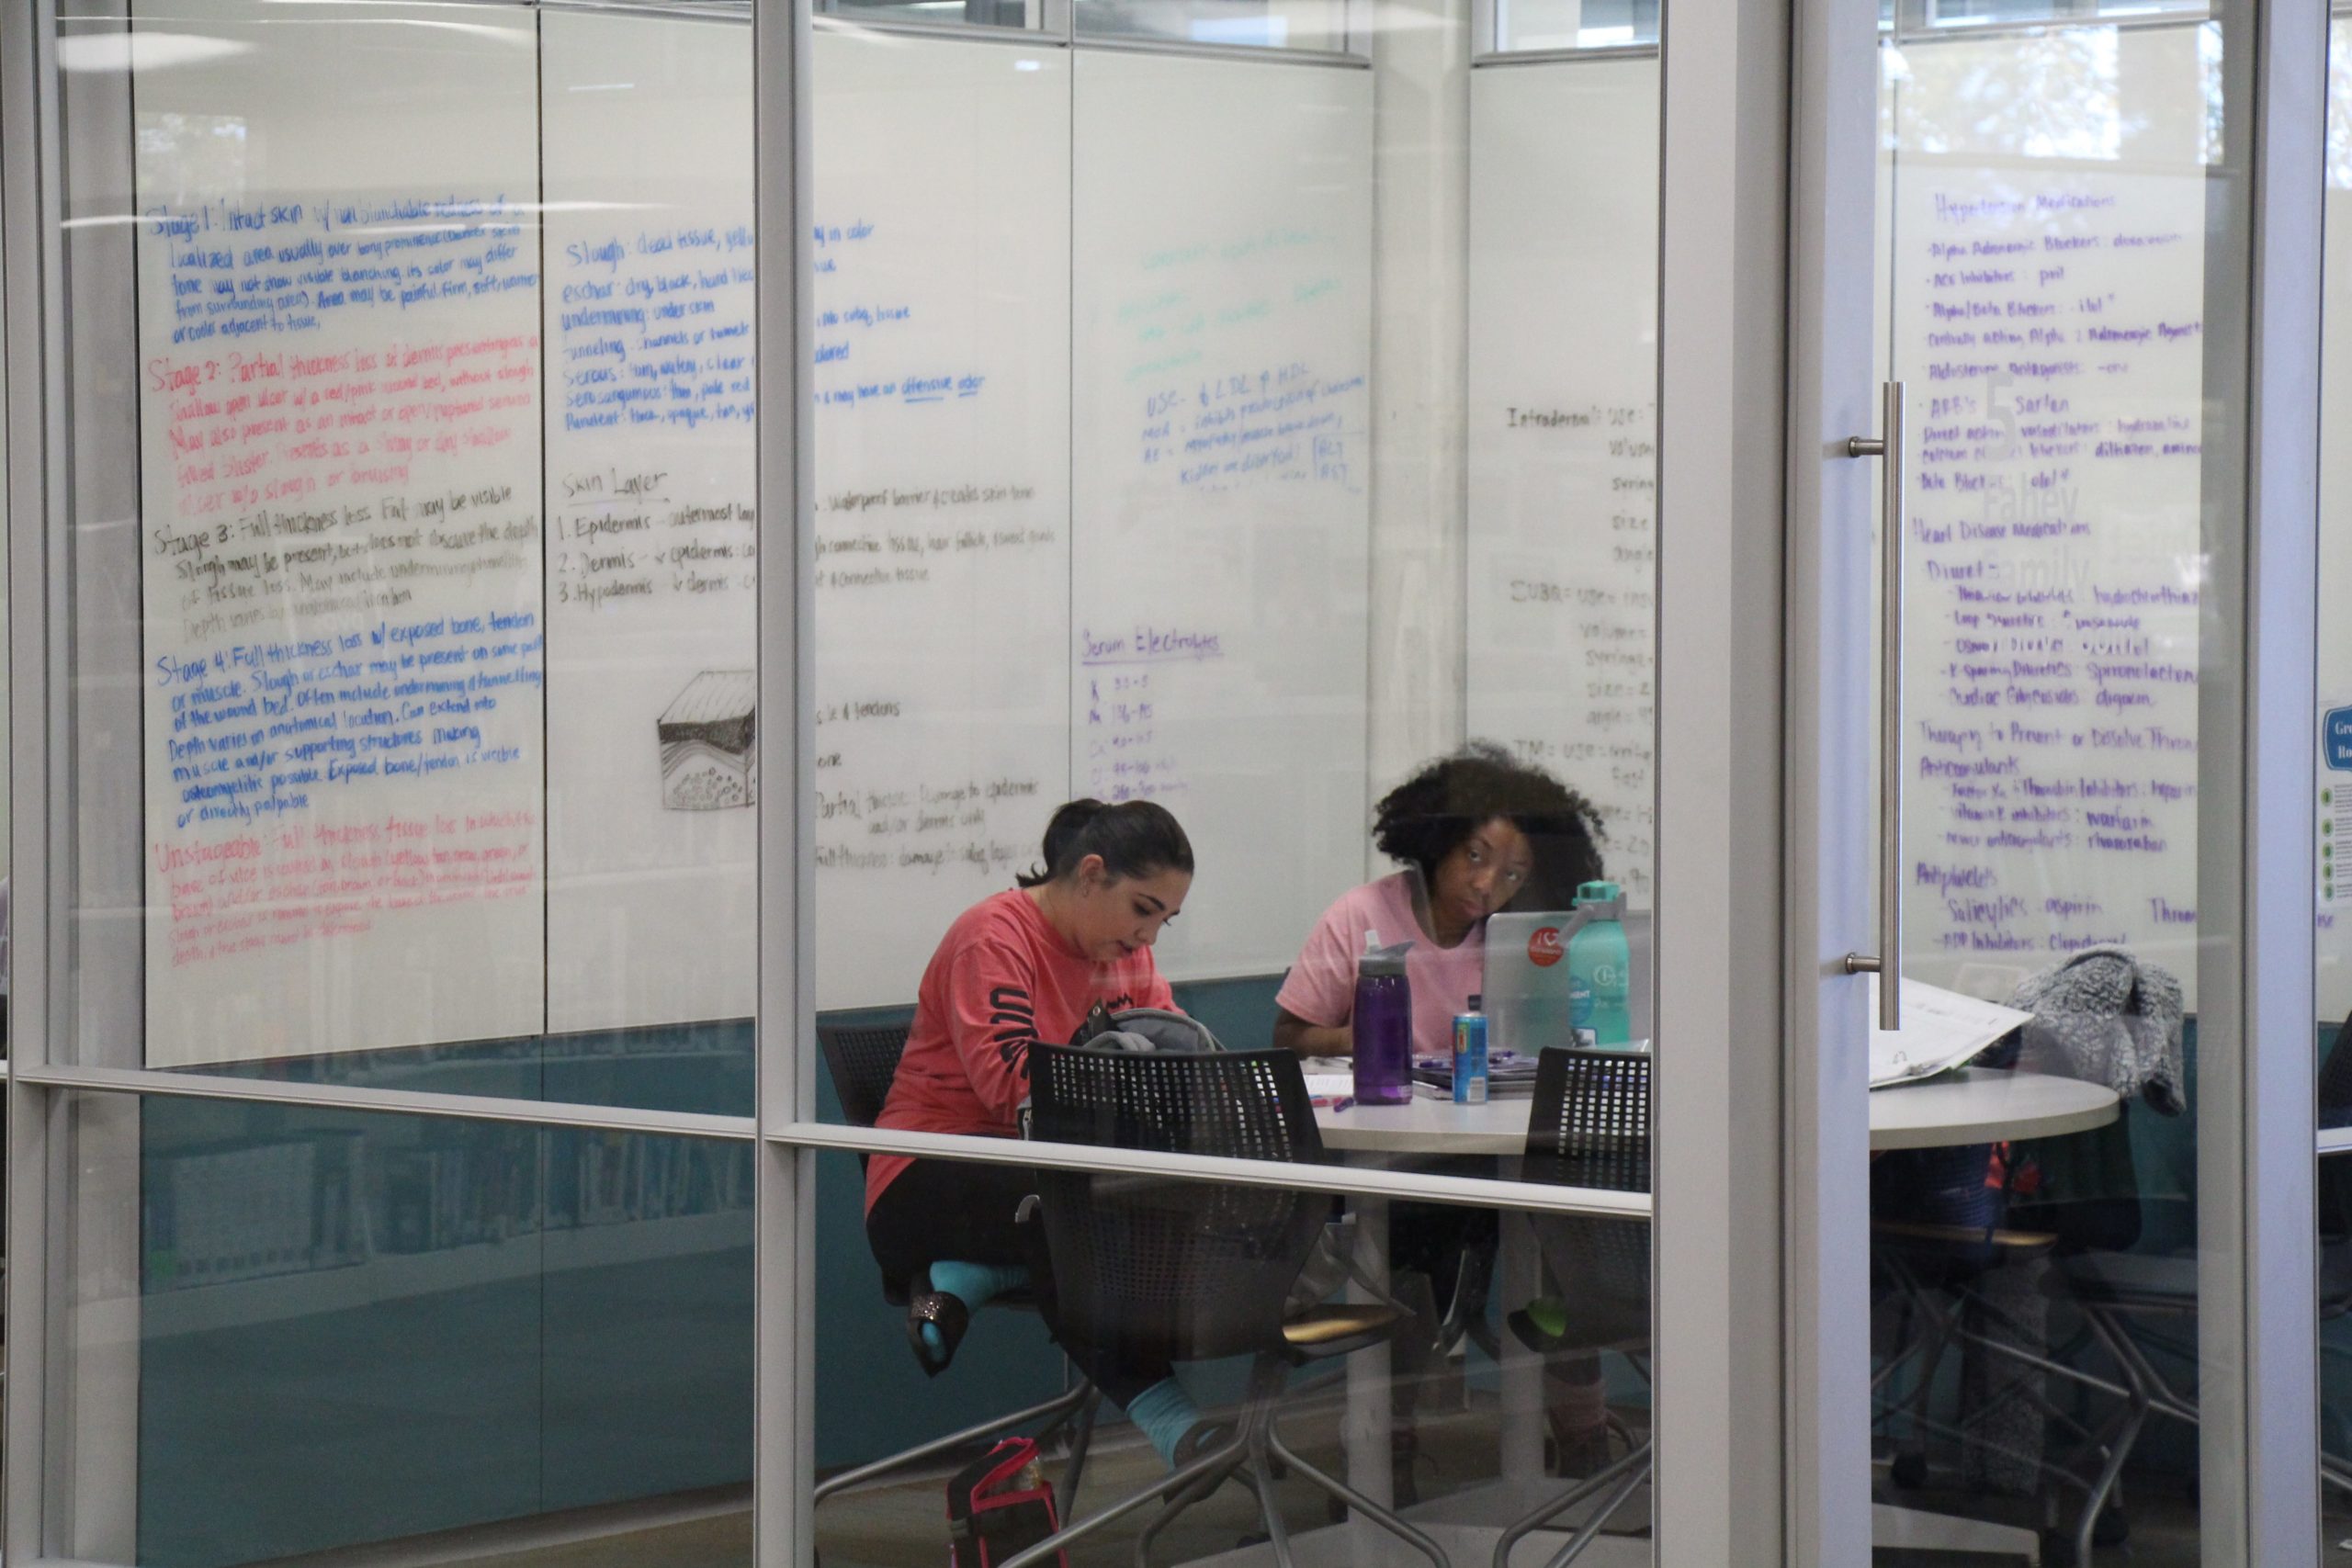 Two students inside one of the glass study rooms inside the Learning Commons